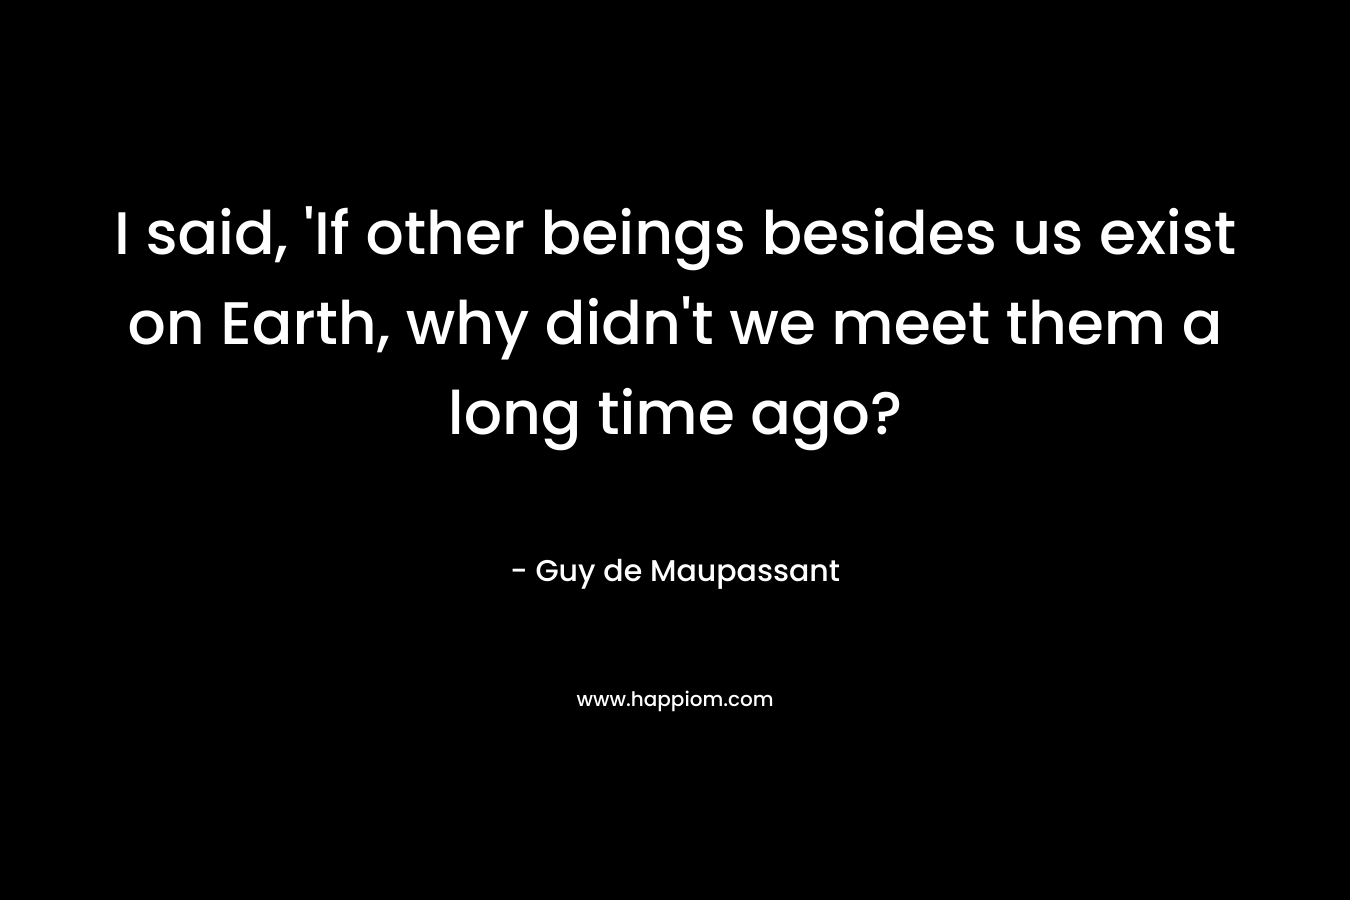 I said, 'If other beings besides us exist on Earth, why didn't we meet them a long time ago?